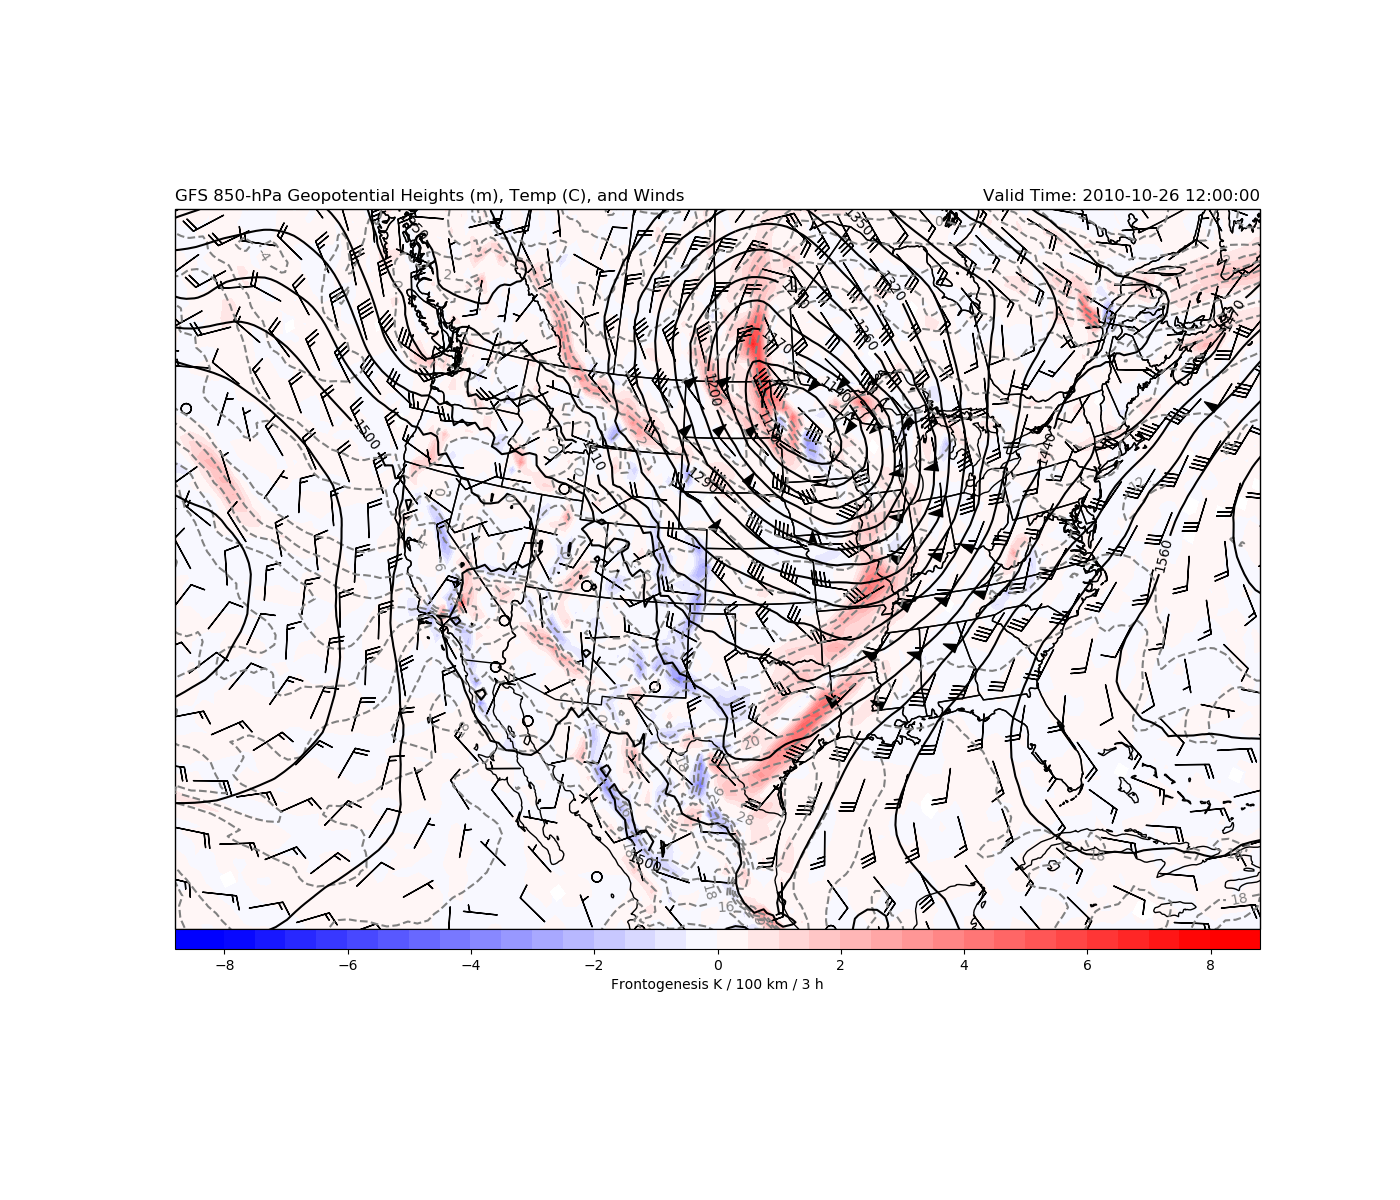 ../_images/sphx_glr_850hPa_Frontogenesis_001.png